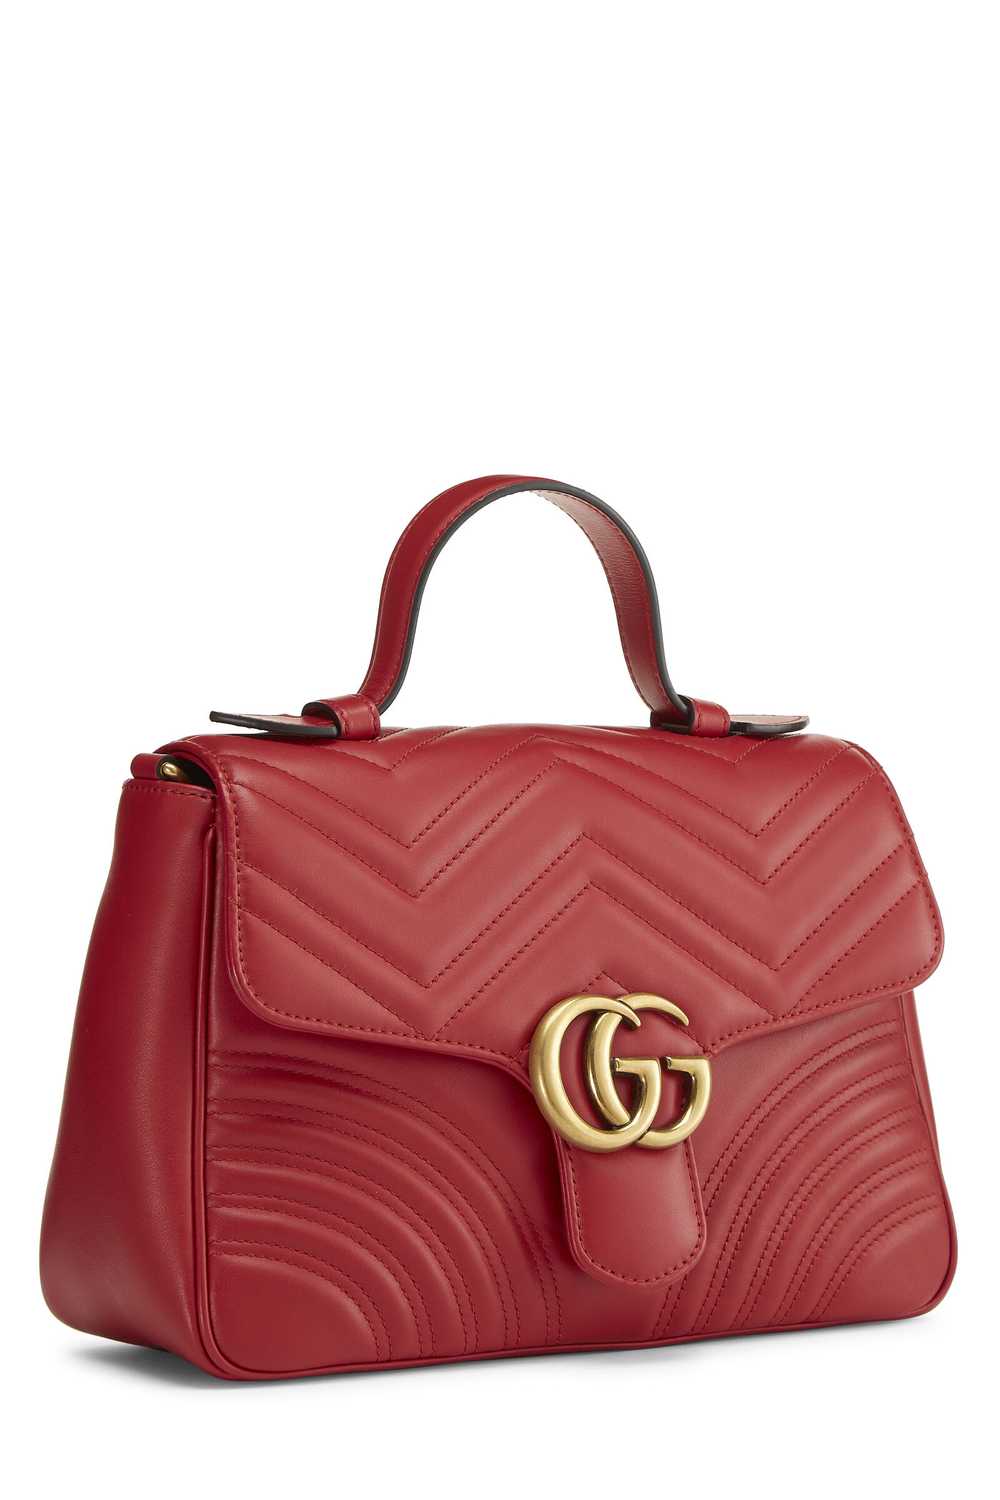 Red Leather GG Marmont Top Handle Bag Small - image 2